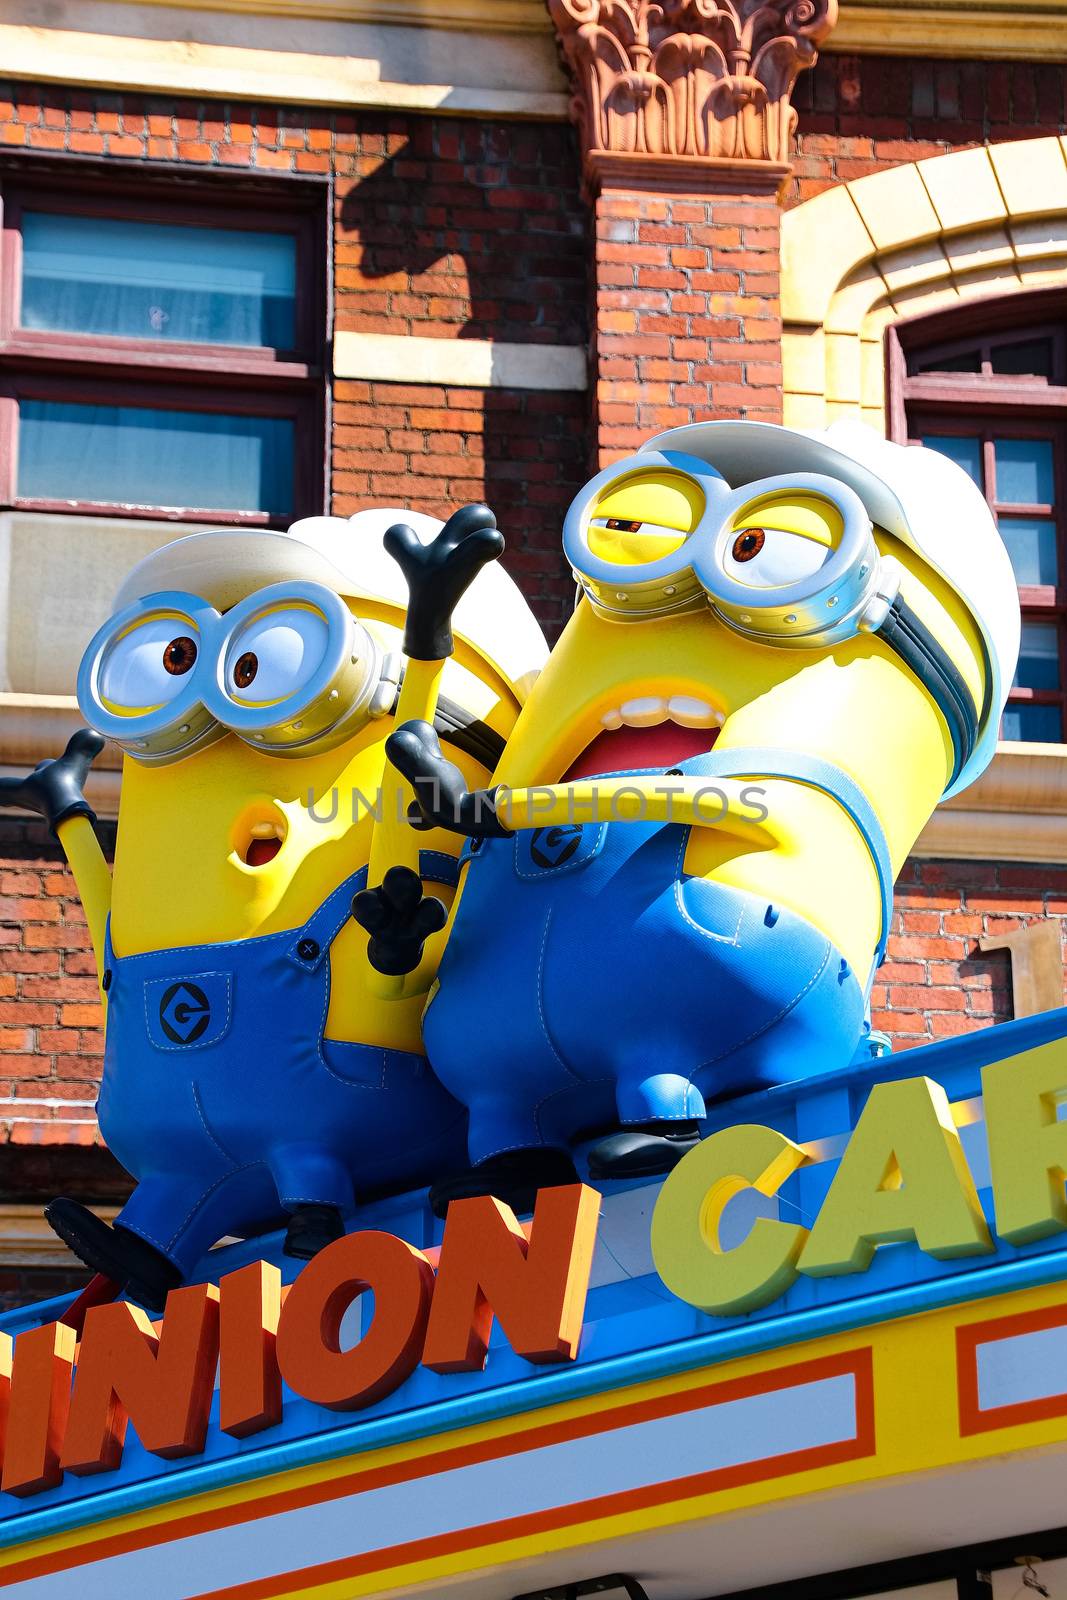 OSAKA, JAPAN - Feb 19, 2020 : Statue of "HAPPY MINION", located in Universal Studios Japan, Osaka, Japan. Minions are famous character from Despicable Me animation. by USA-TARO